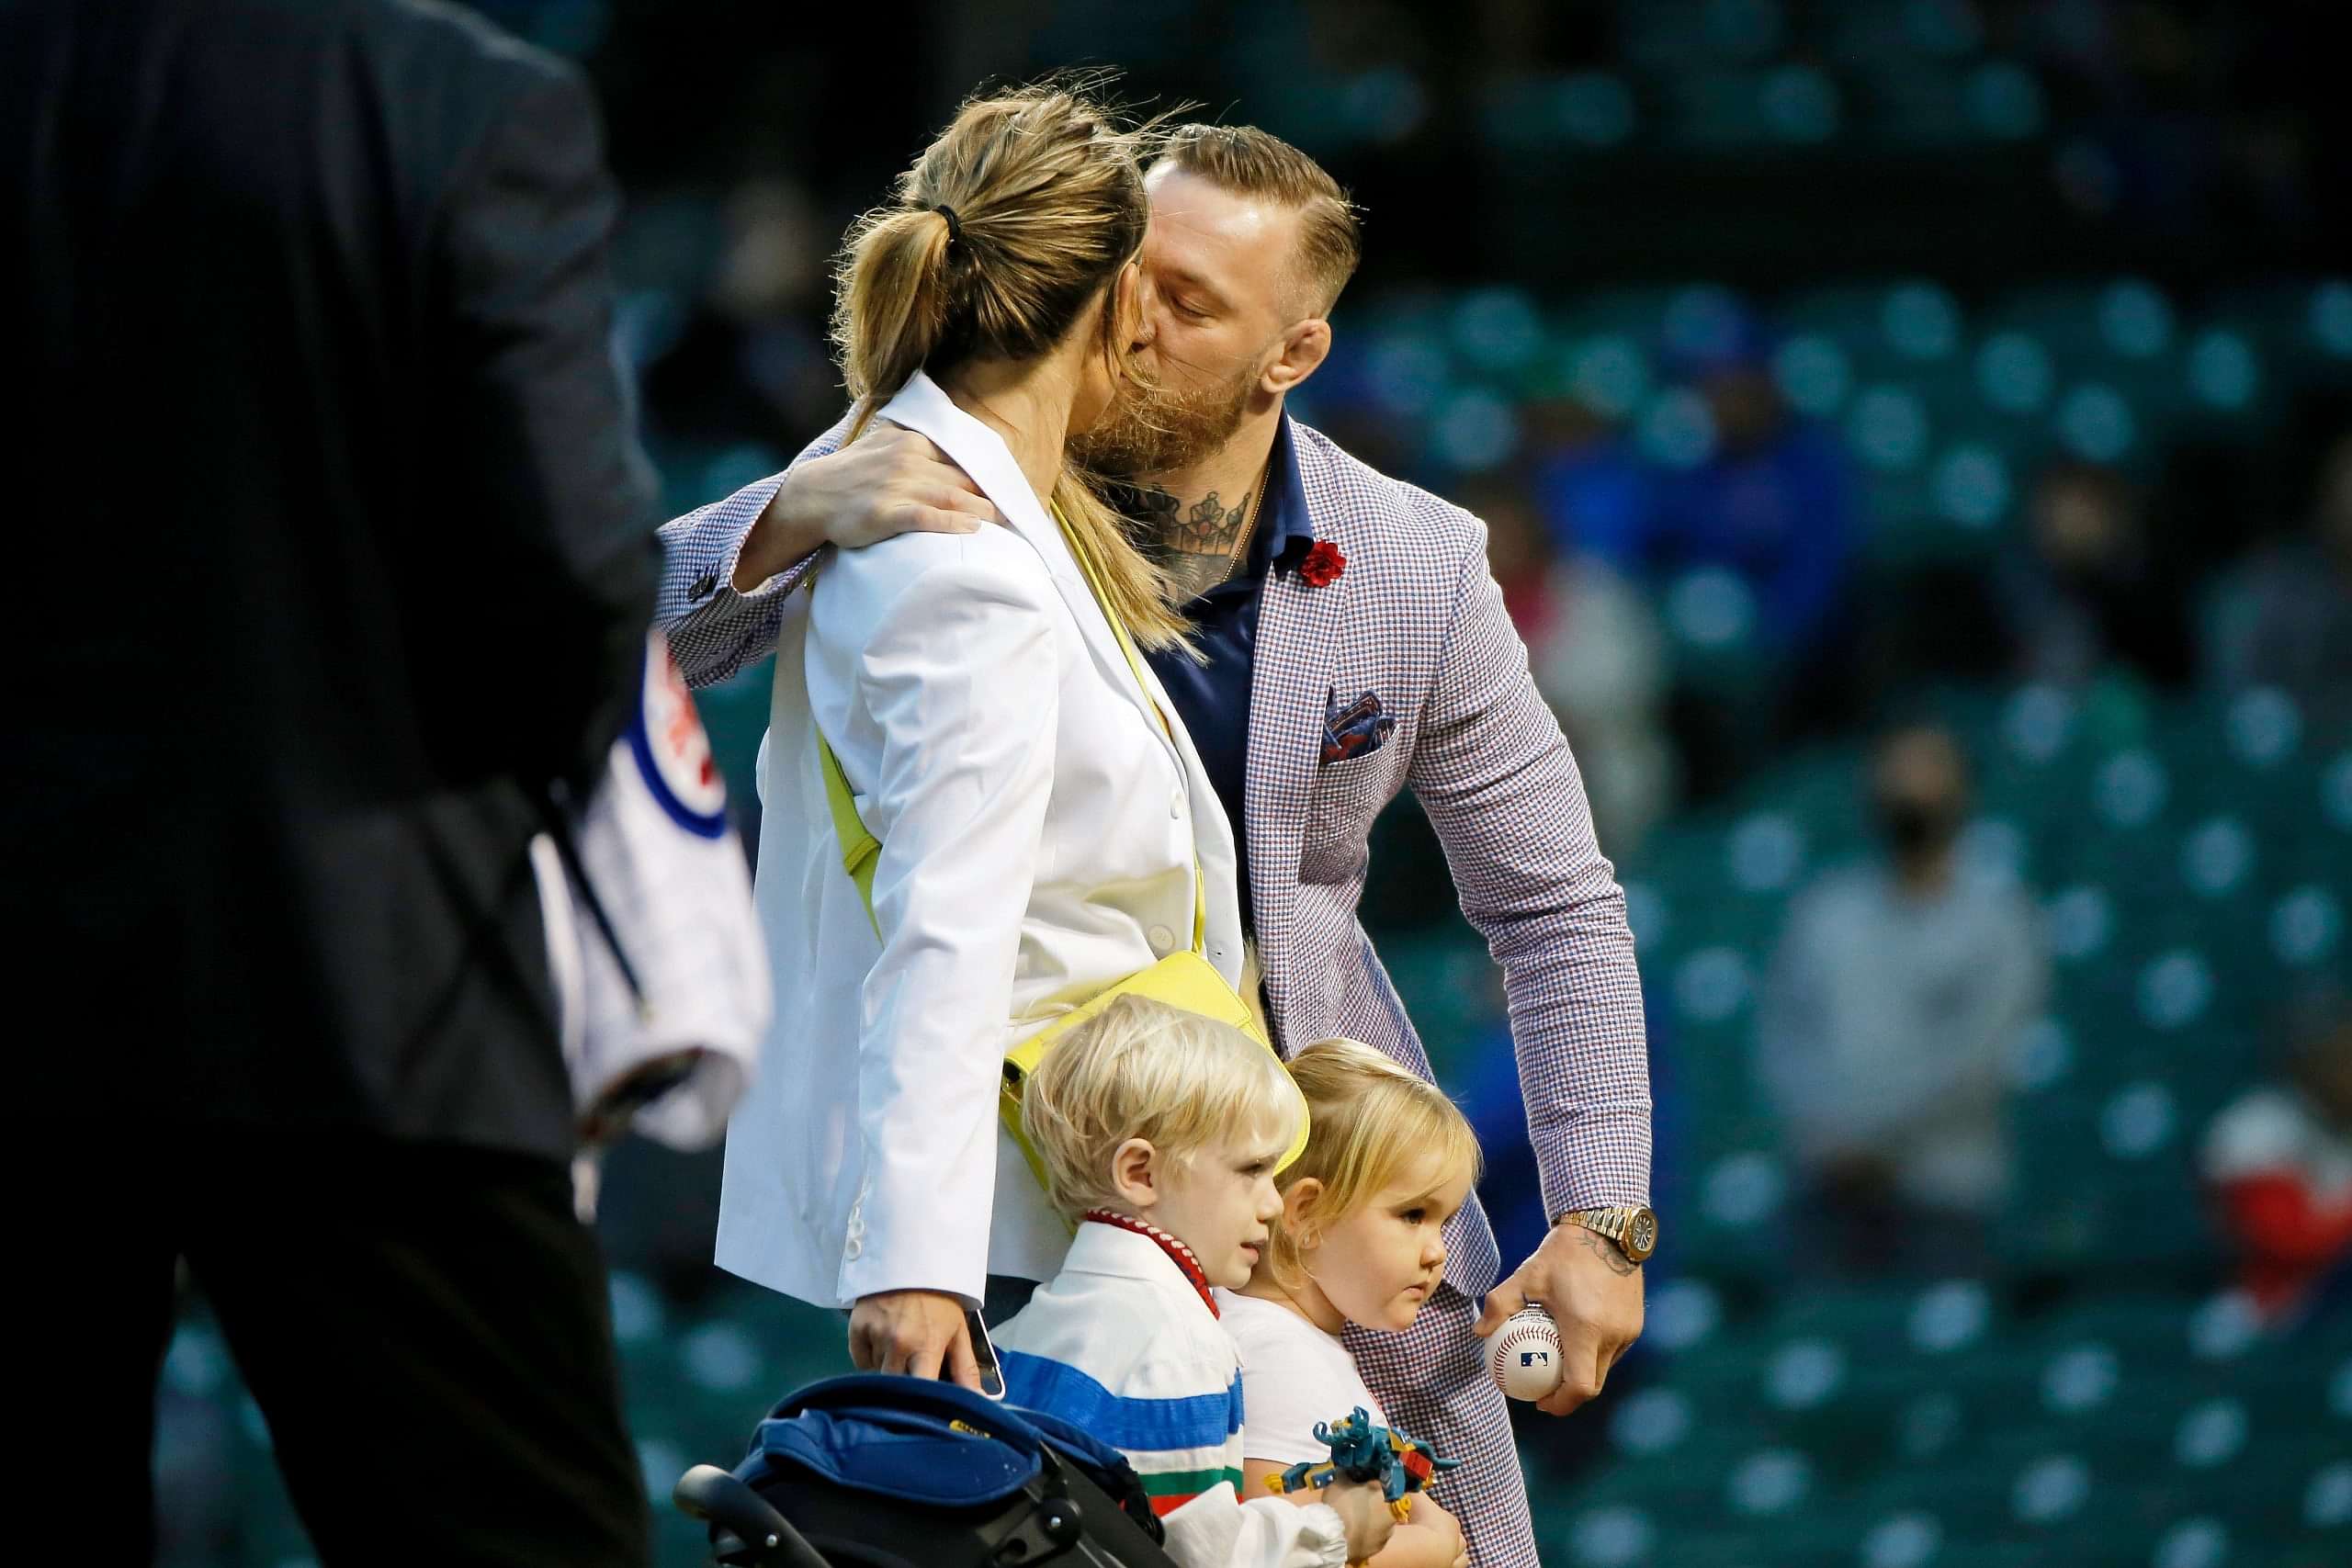 Conor McGregor Family Is the UFC Superstar Married How Many Kids